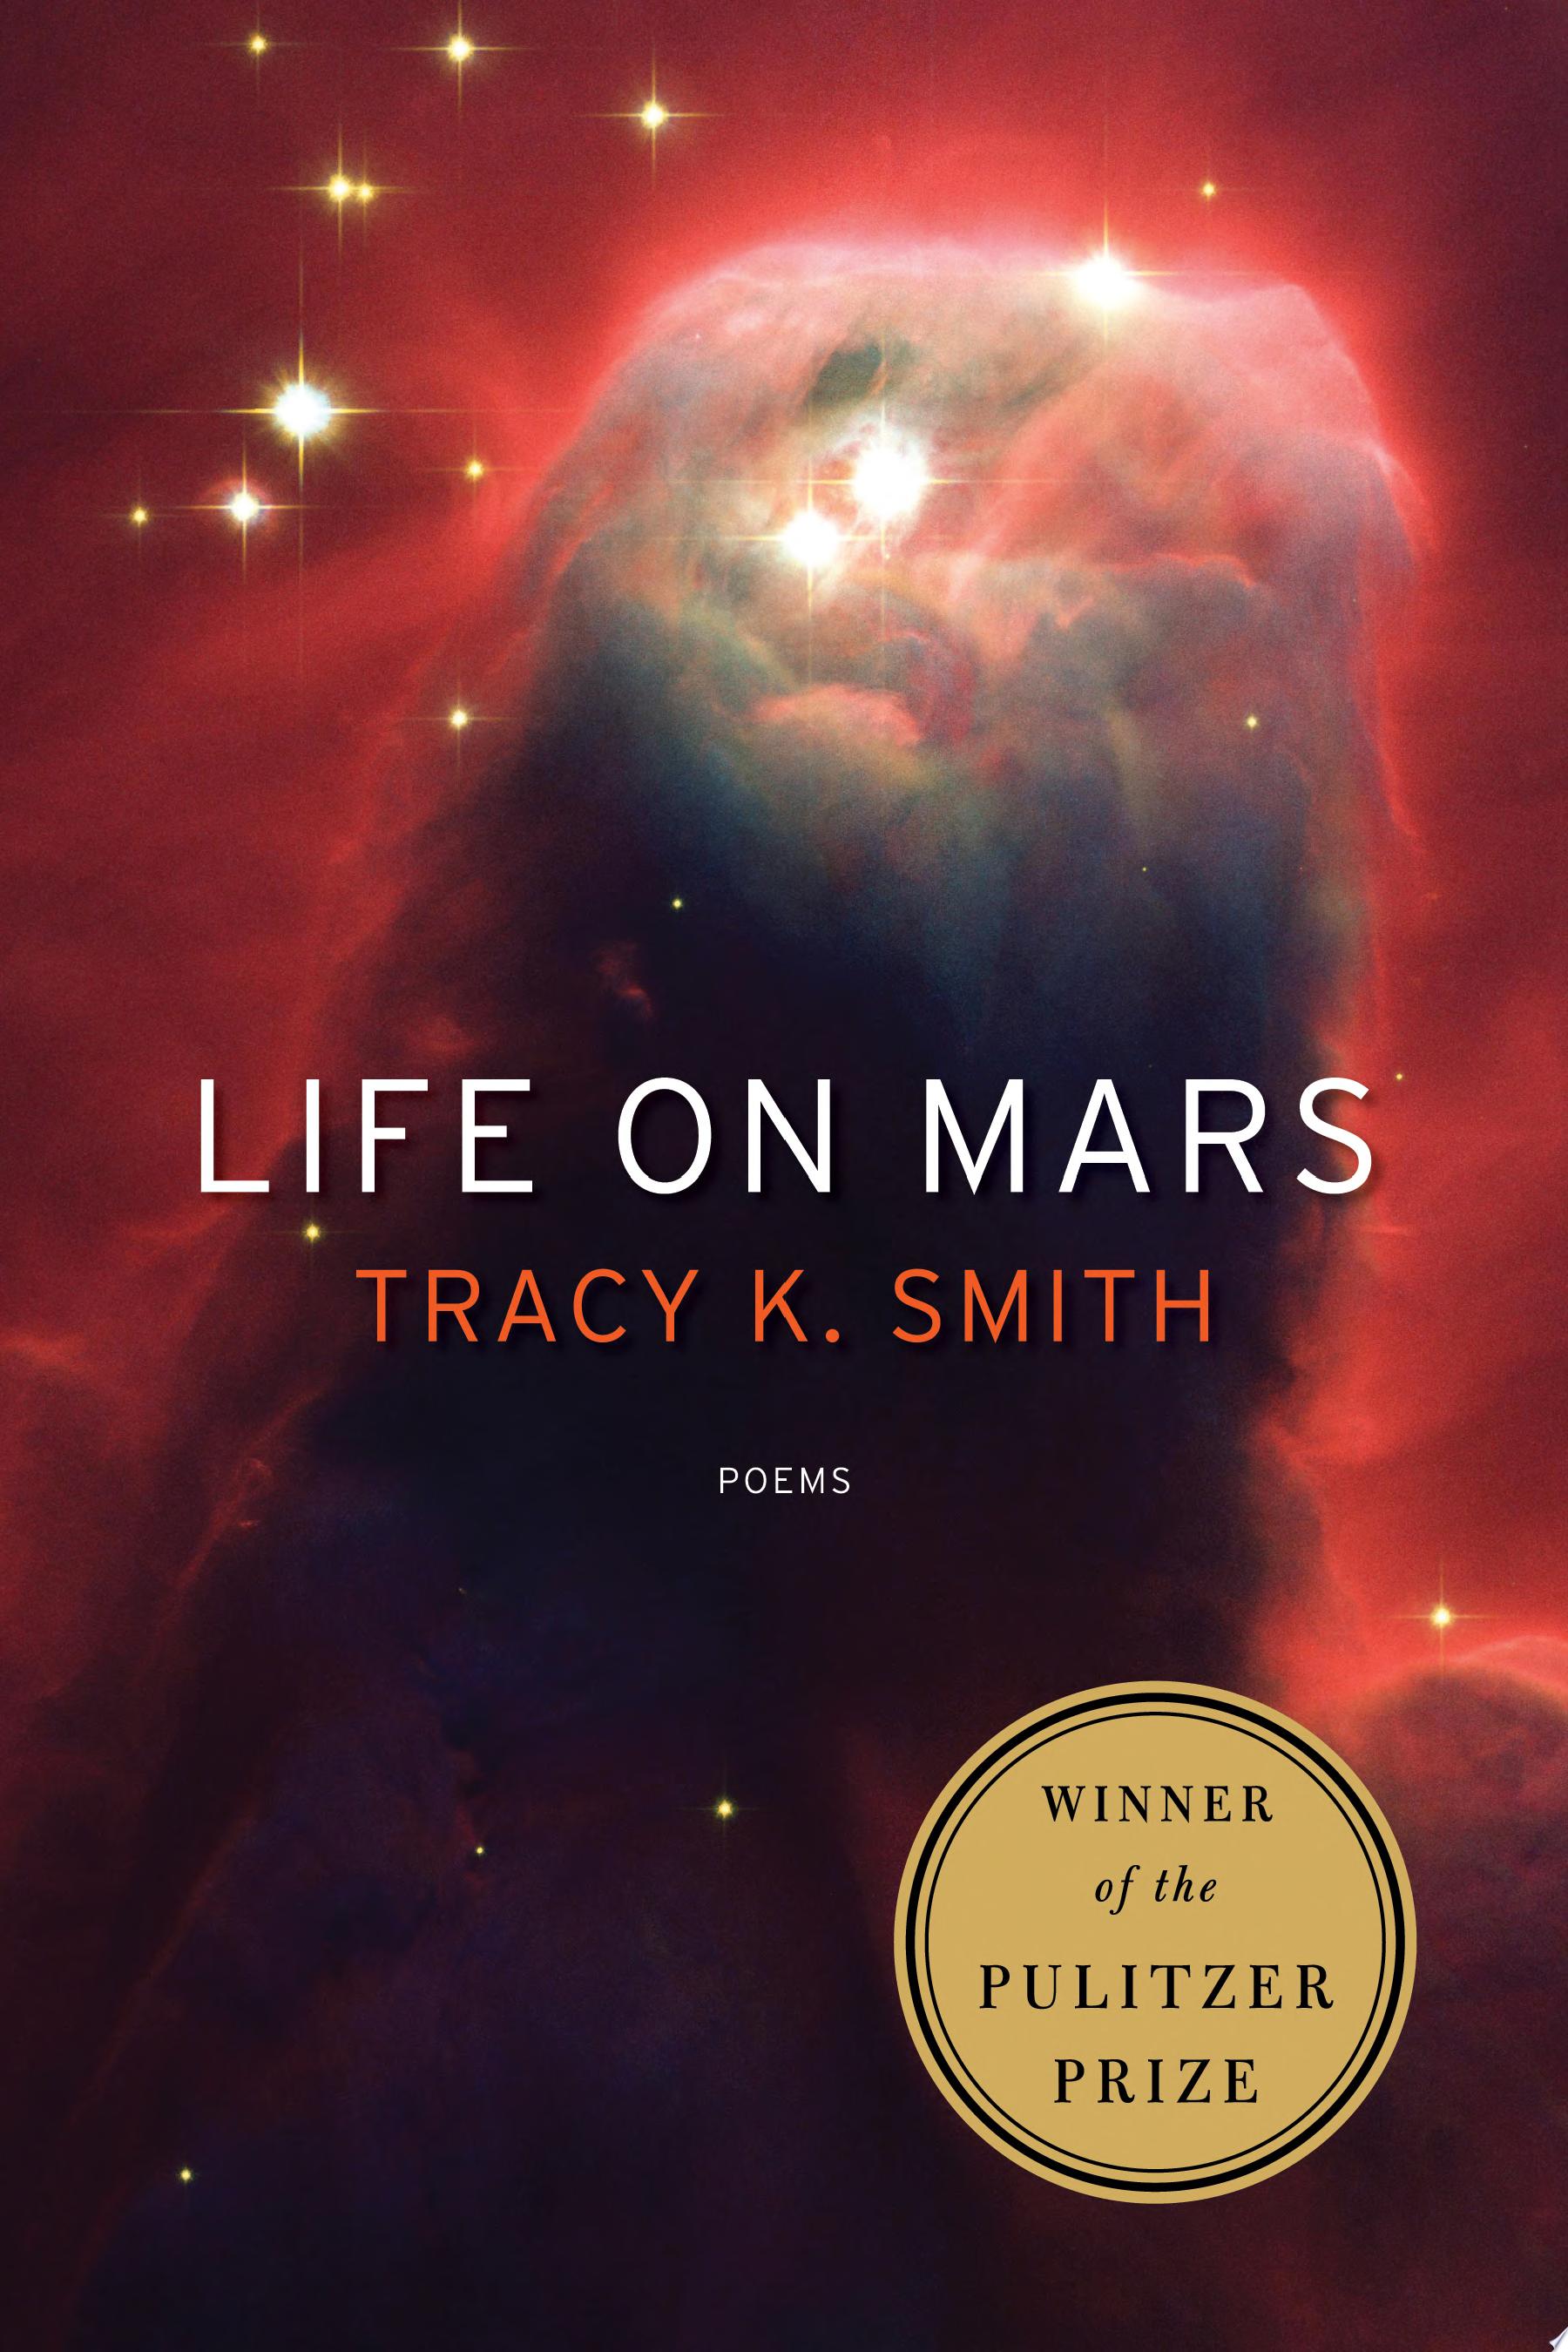 Image for "Life on Mars"